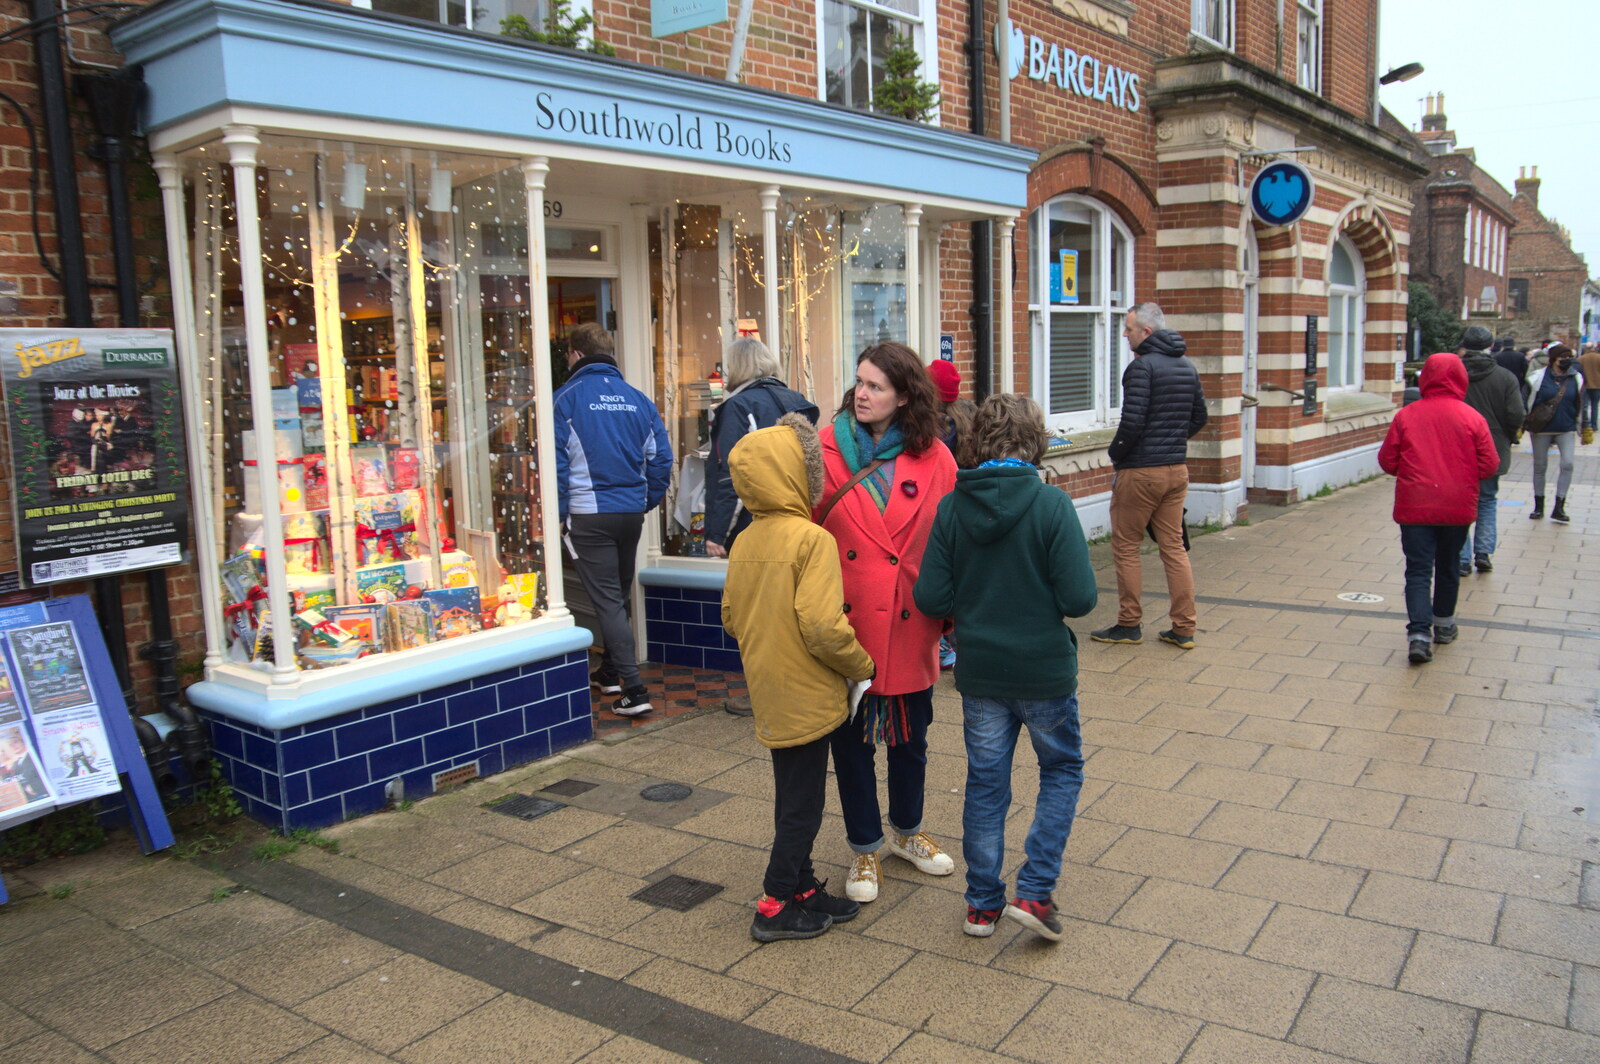 We pause outside Southwold Books from A Few Hours at the Seaside, Southwold, Suffolk - 27th December 2021